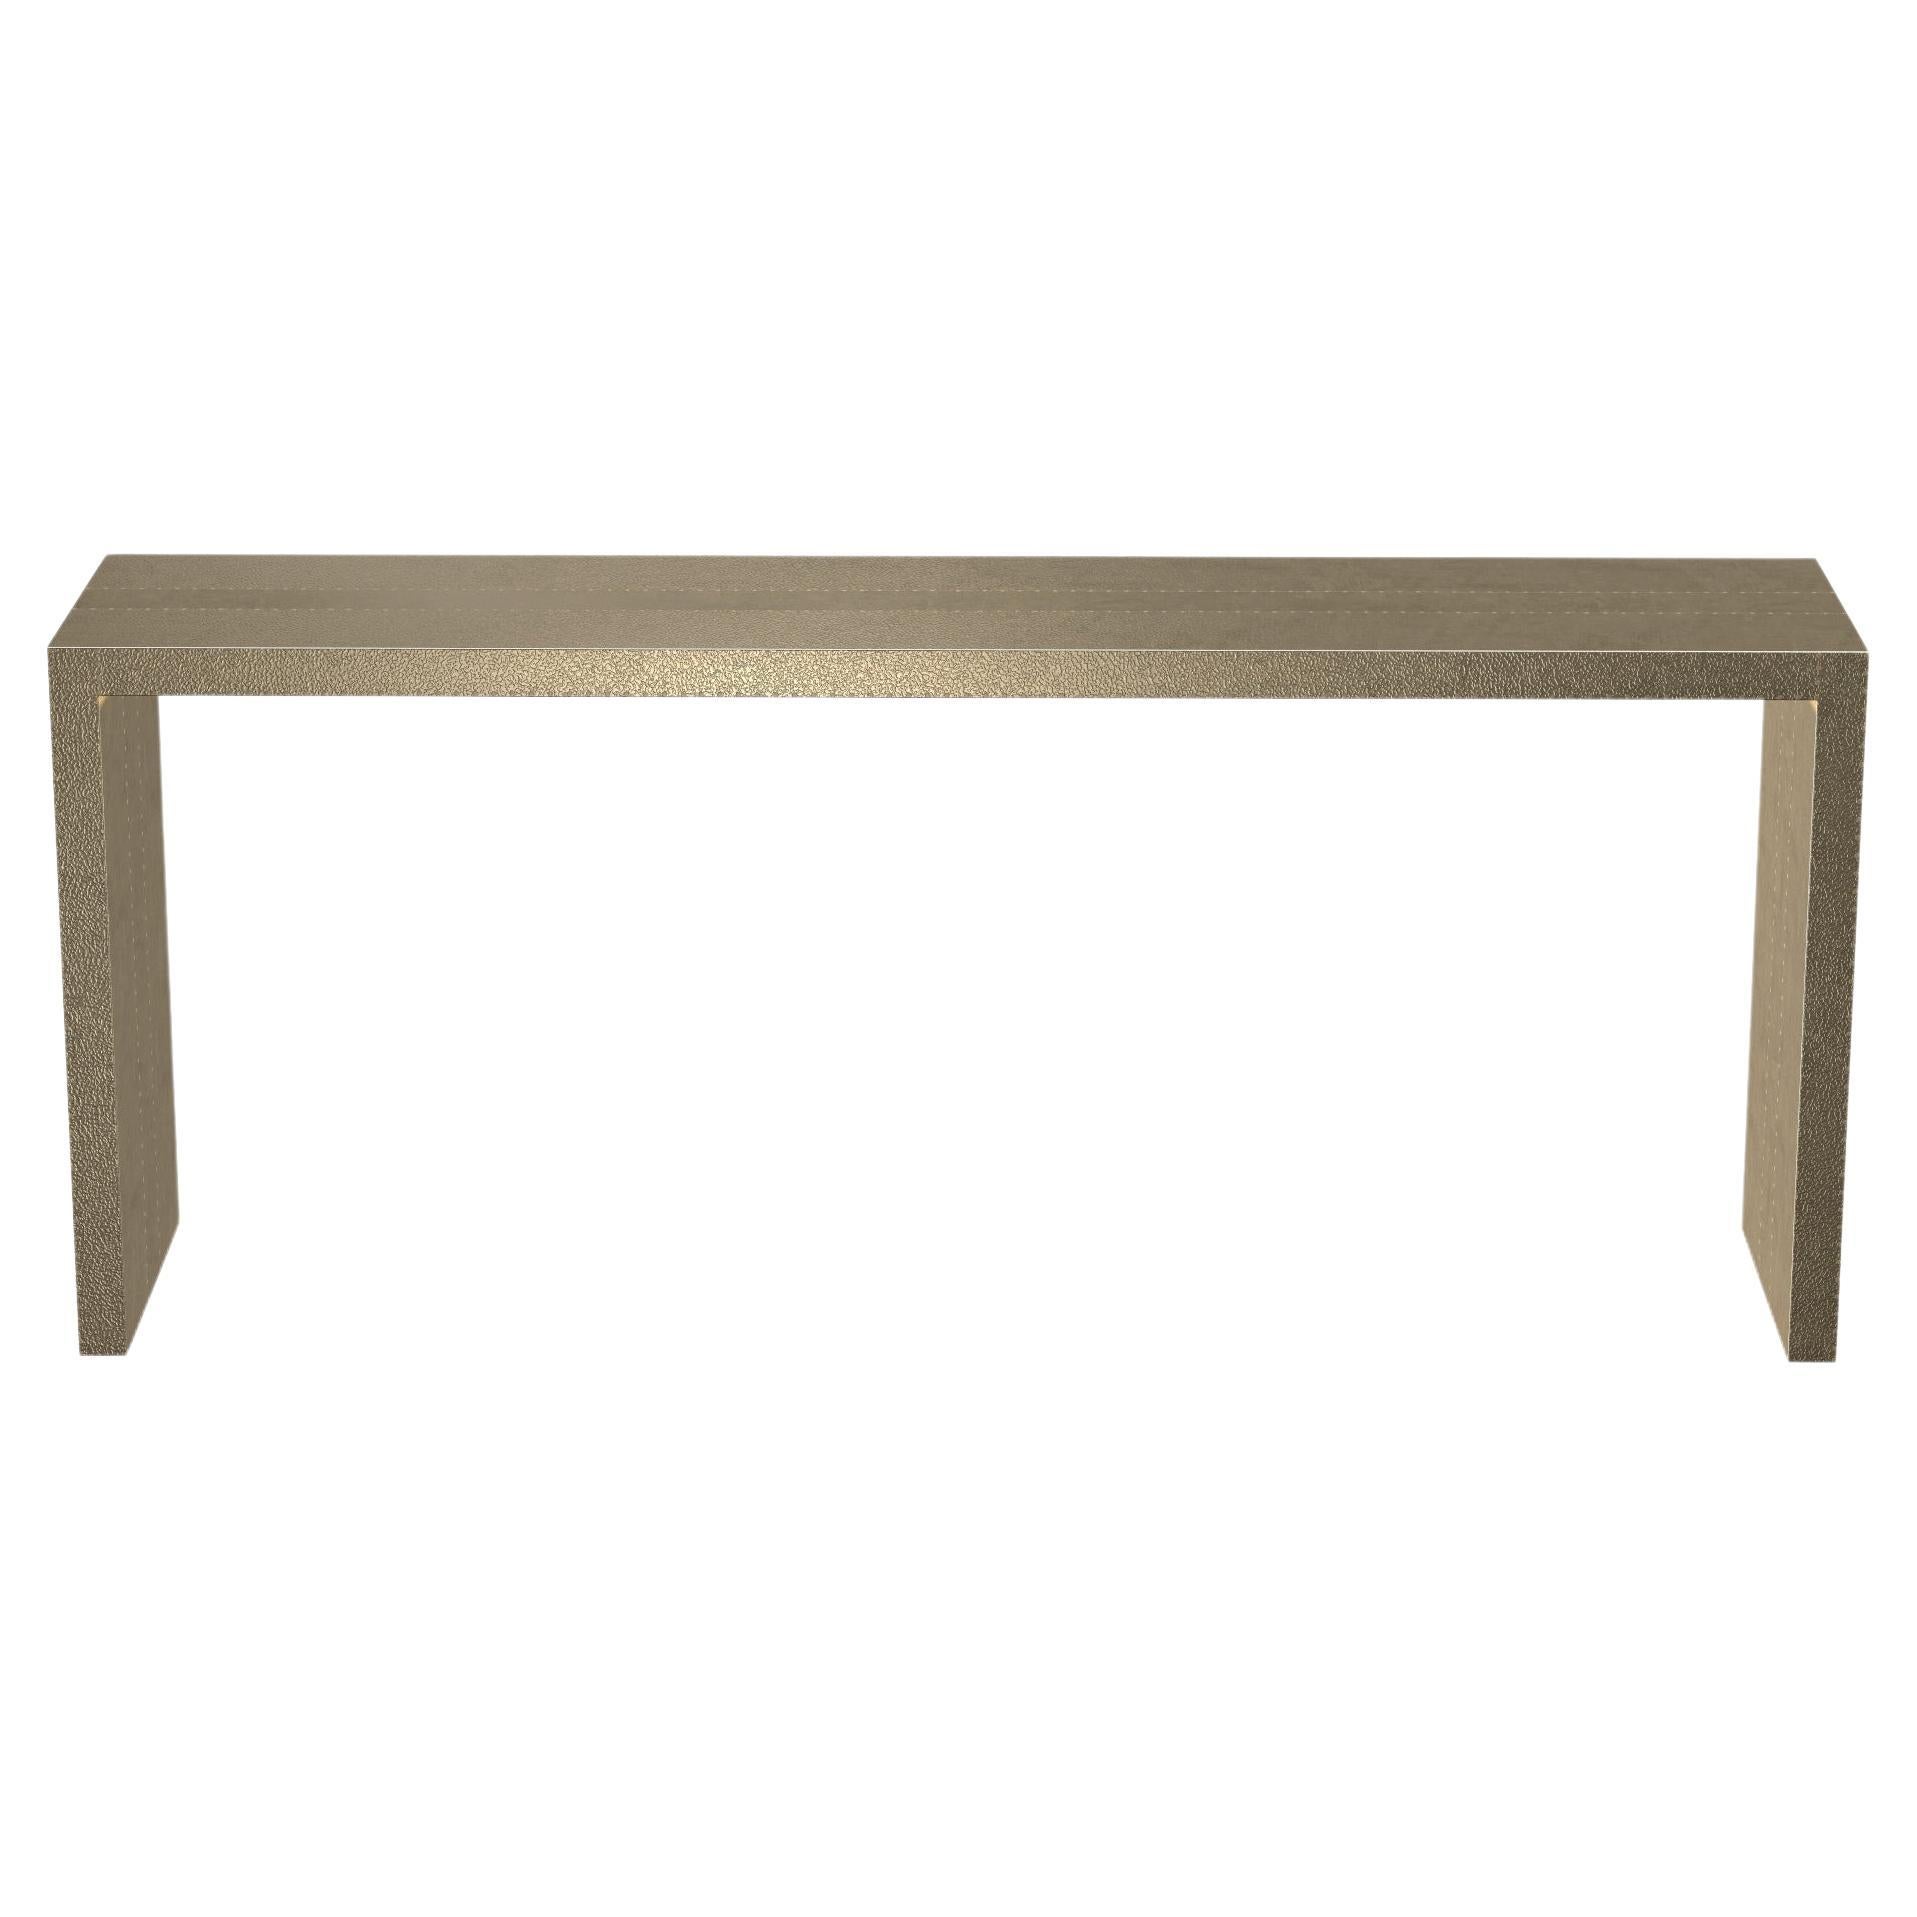 Art Deco Conference Console Tables in Copper Fine Hammered by Alison Spear For Sale